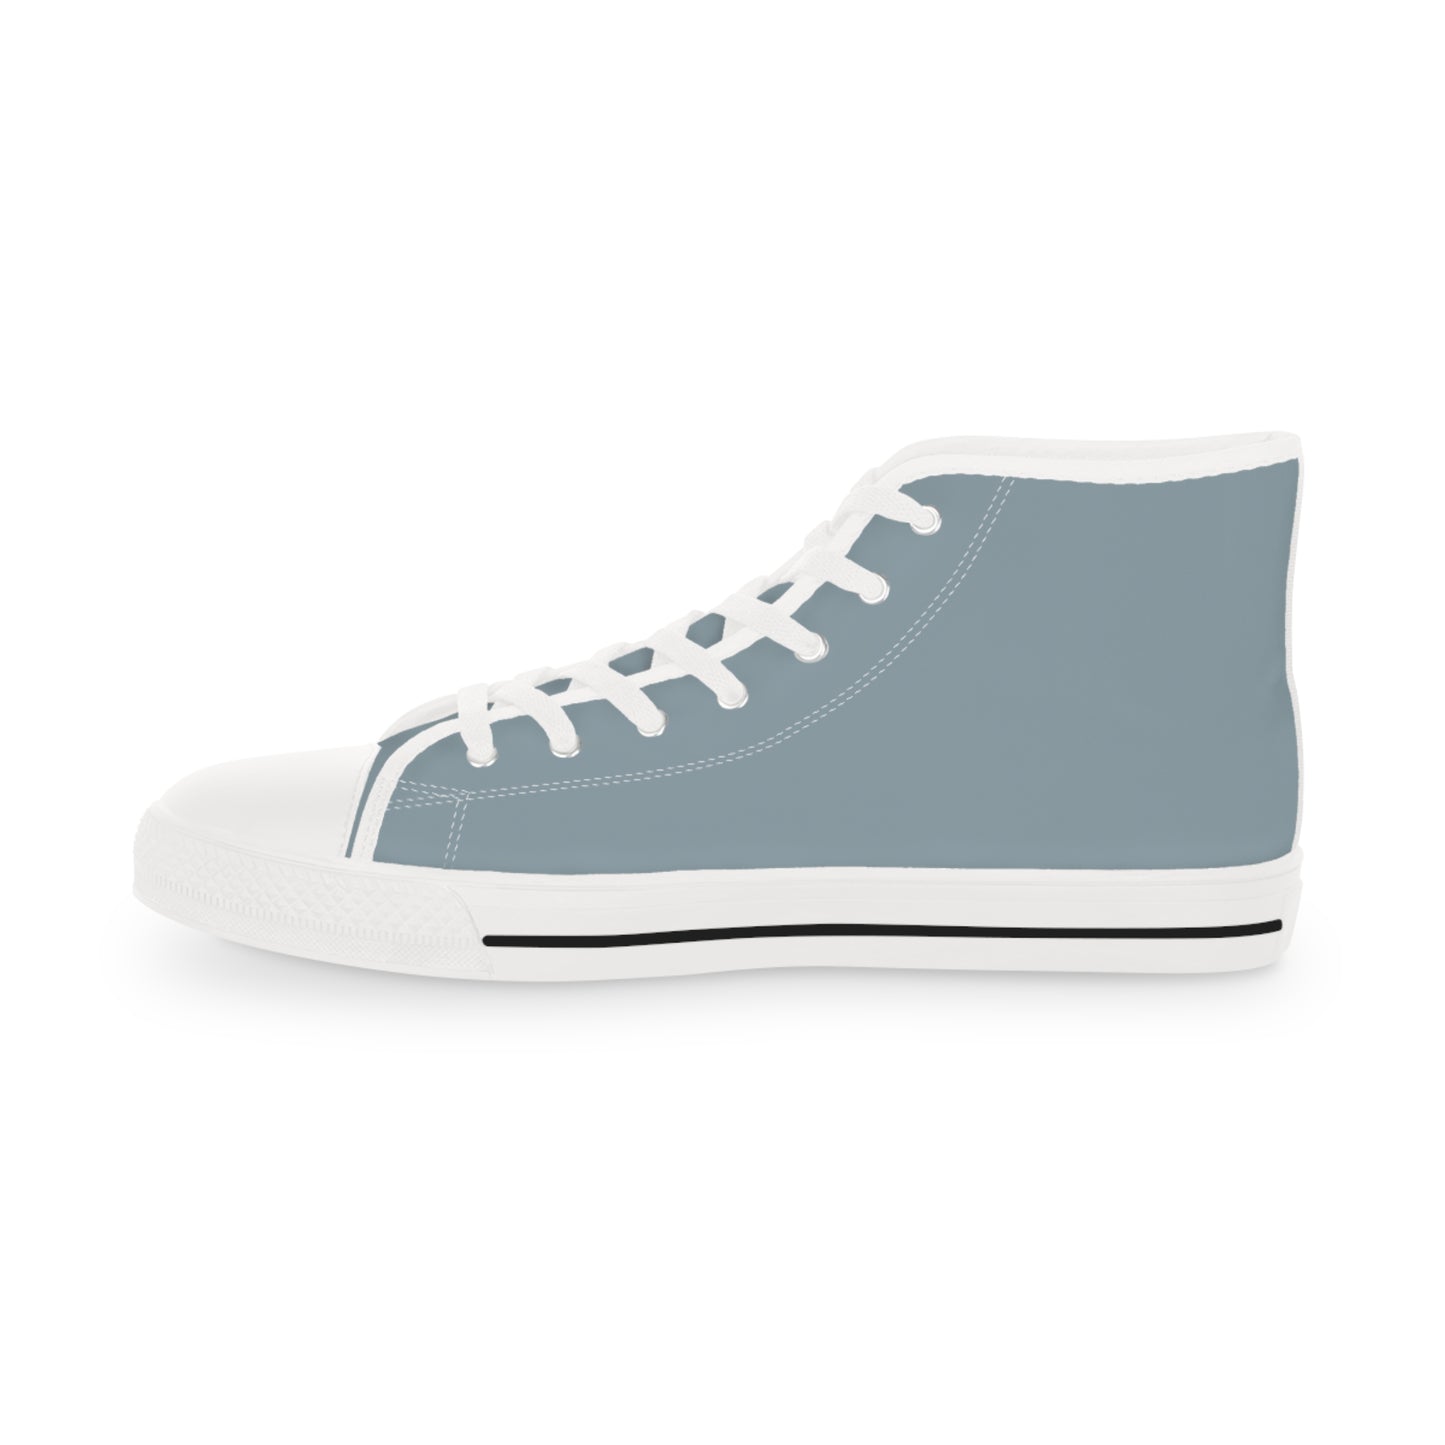 Men's Canvas High Top Solid Color Sneakers - Storm Gray US 14 White sole